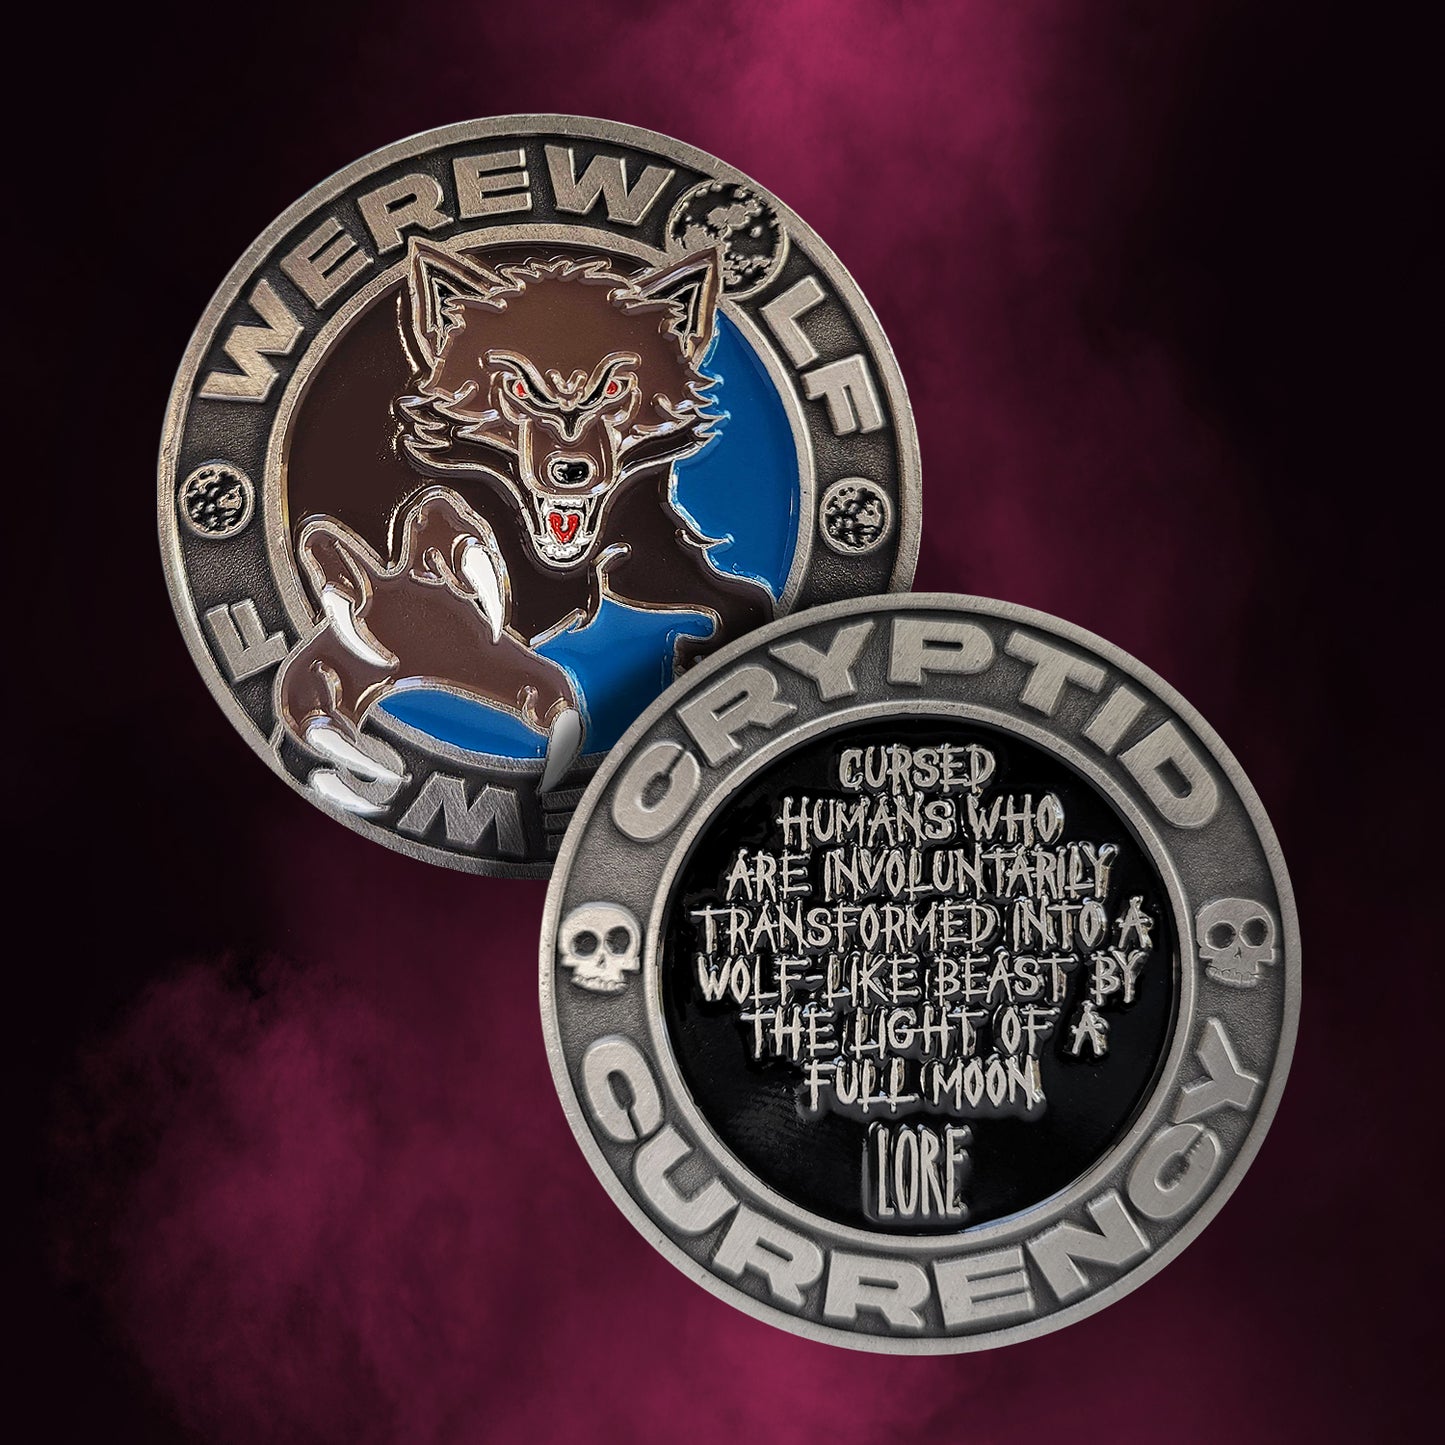 Front and back images of a brass coin on a purple and black background. On the front of the coin is a brown and black drawing of werewolf, with “were”wolf stamped into the coin's edge. On the back of the coin is a black circle, with white text saying “cursed humans who are involuntarily transformed into a wolf-like beast by the light of a full moon: Lore." Around the edge is stamped text saying "cryptid currency."